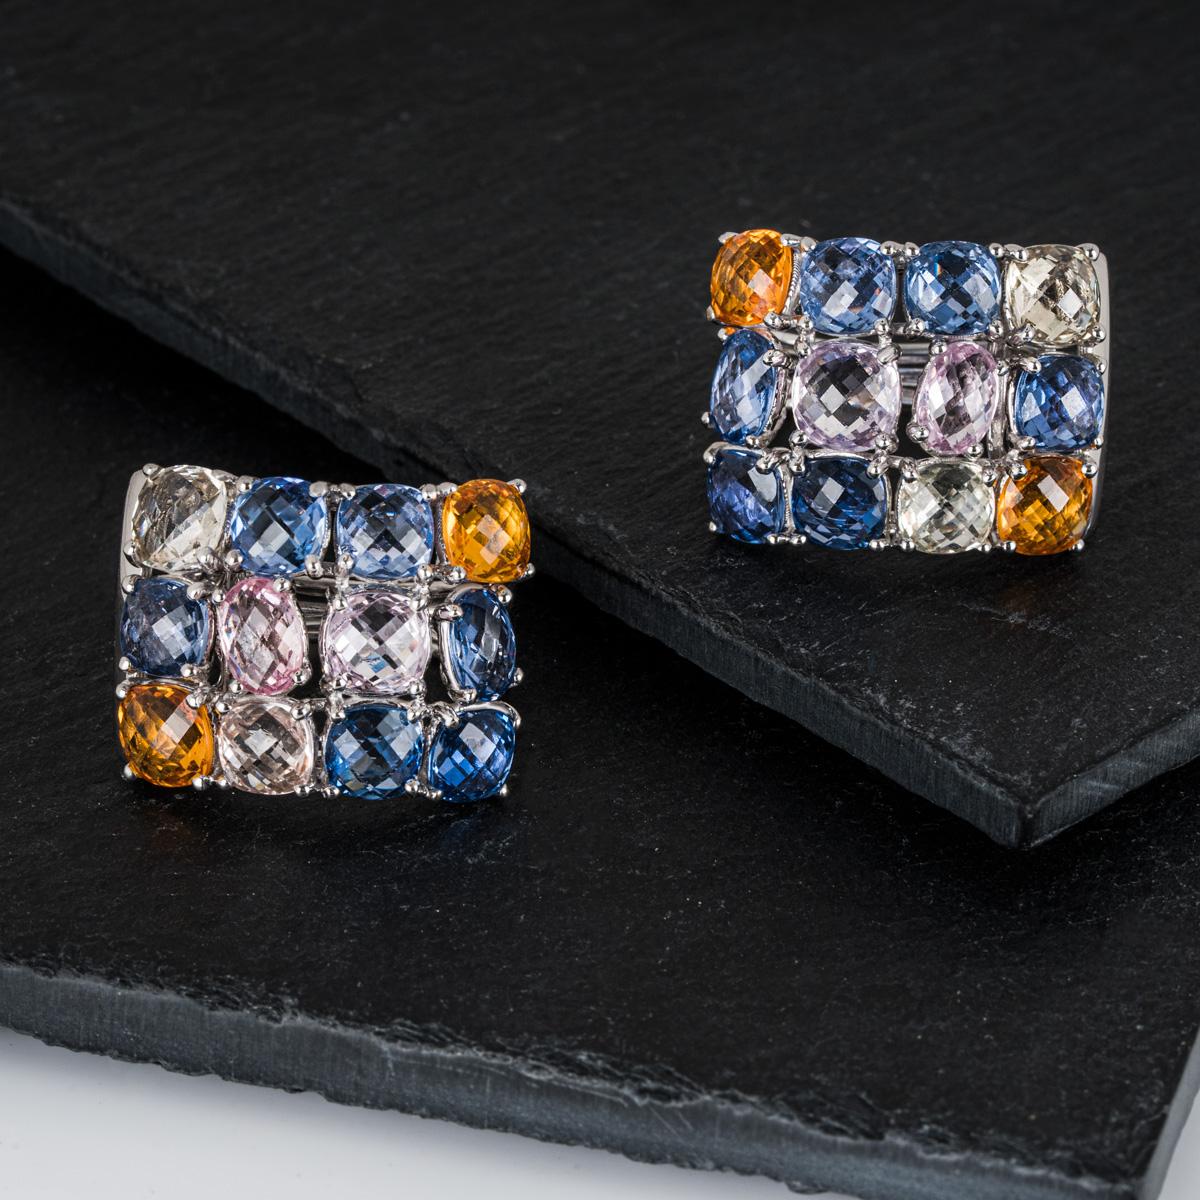 Multi-Colored Sapphire Earrings 17.51 Carat For Sale 1